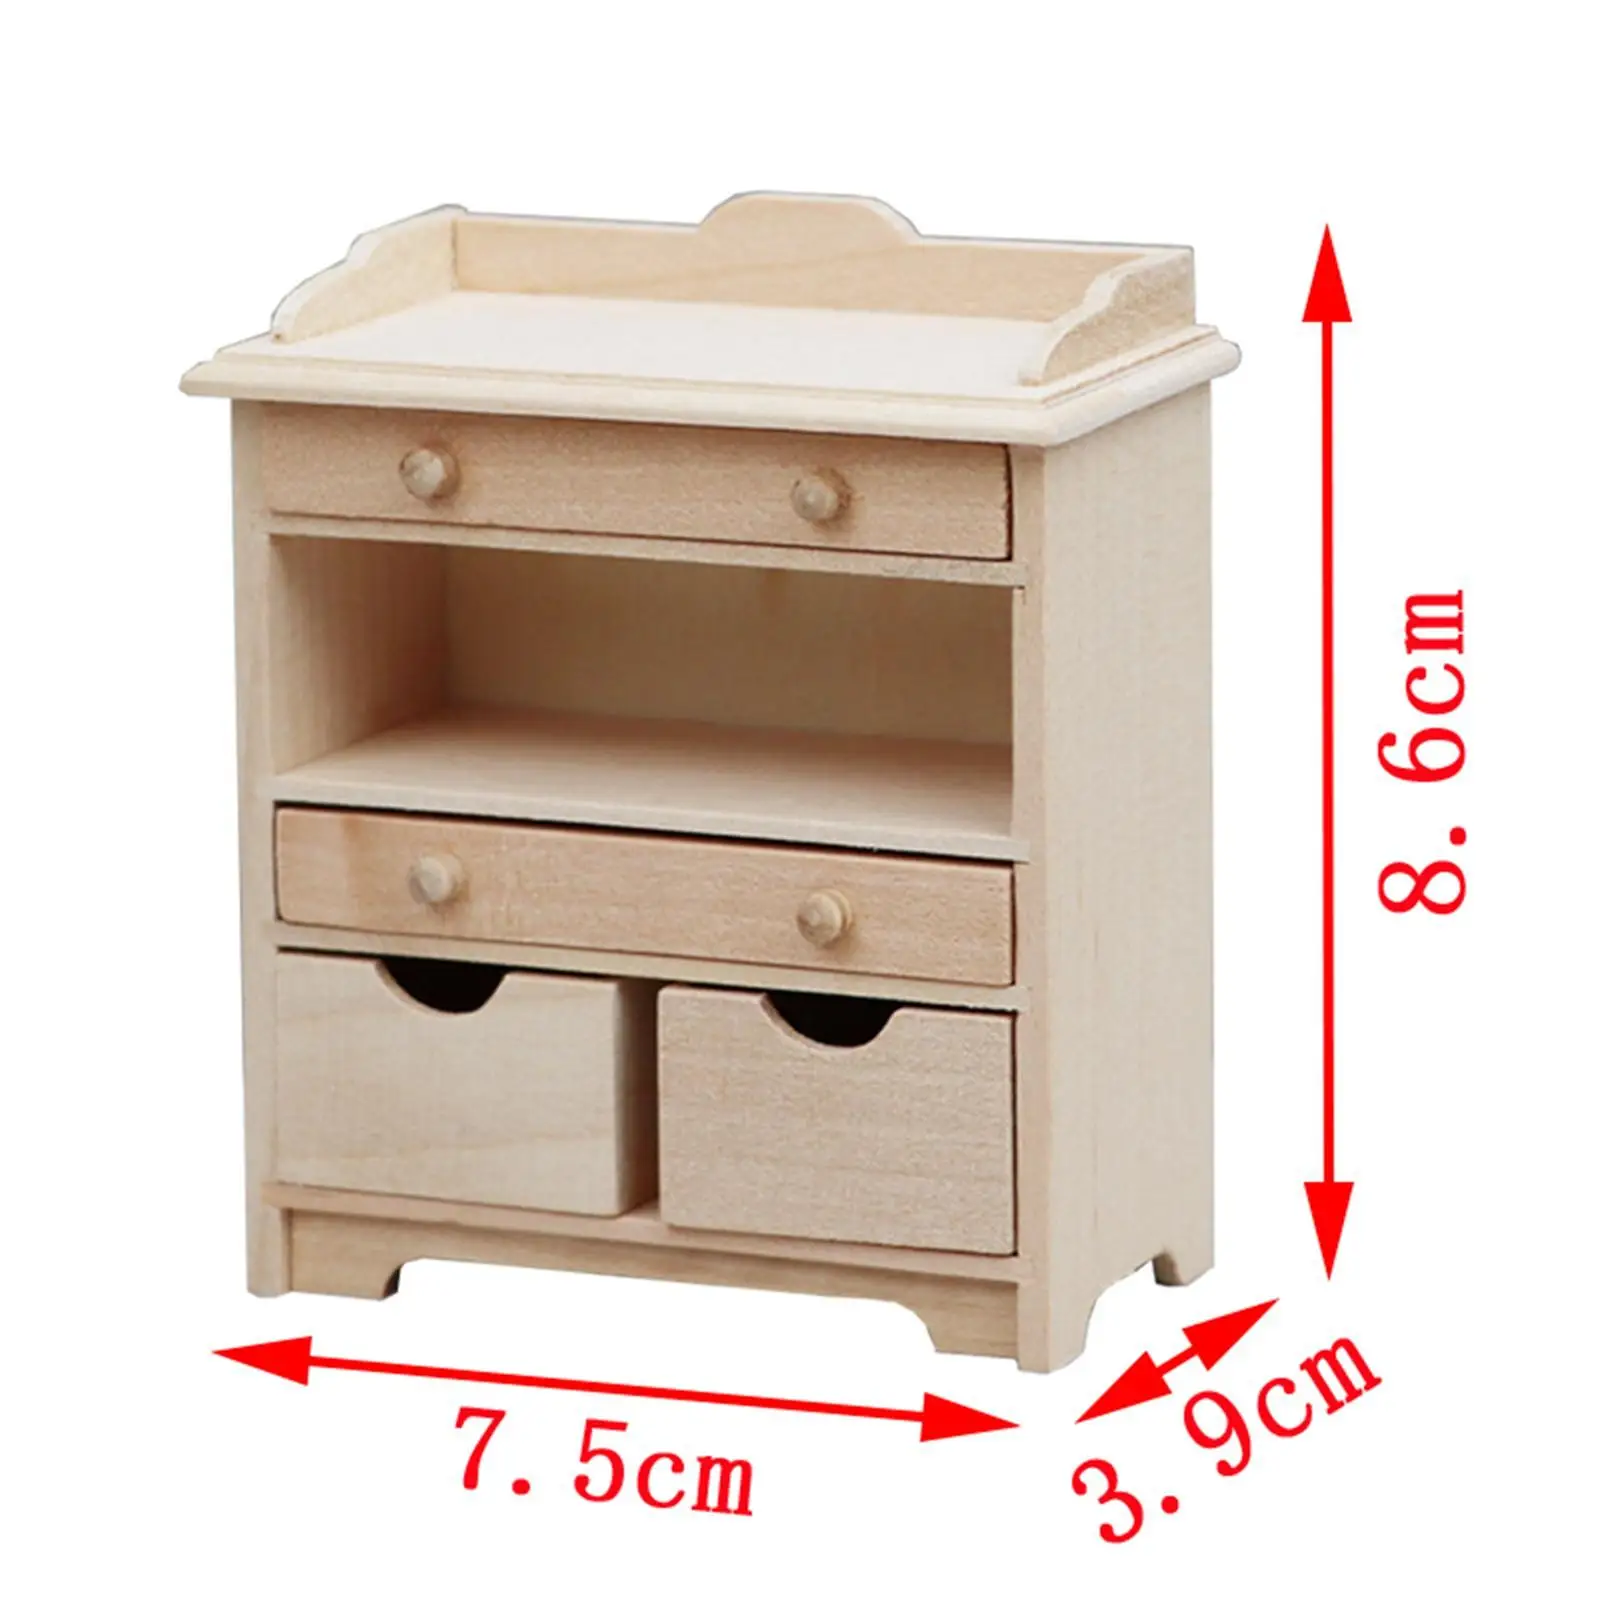 1/12 Dollhouse NightStand Unpainted for Room Box DIY Projects Pretend Play